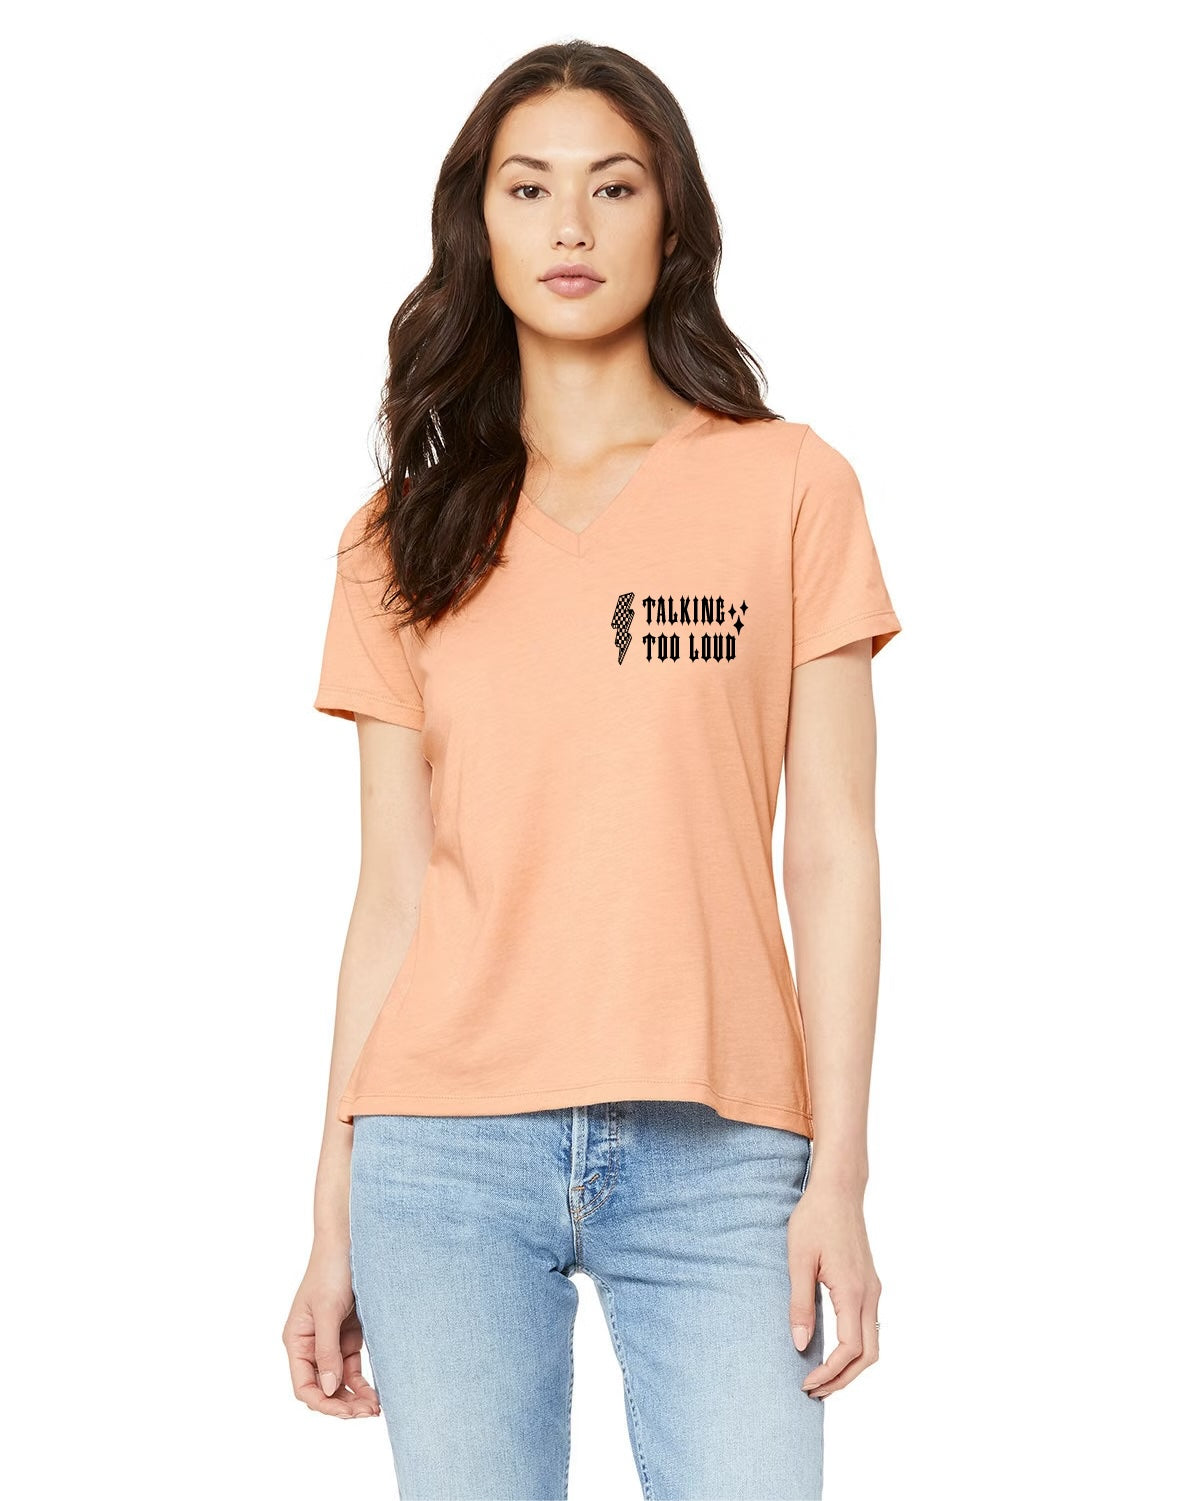 Front of peach shirt that says Talking too loud with sparkles and checkered lightning bulb.